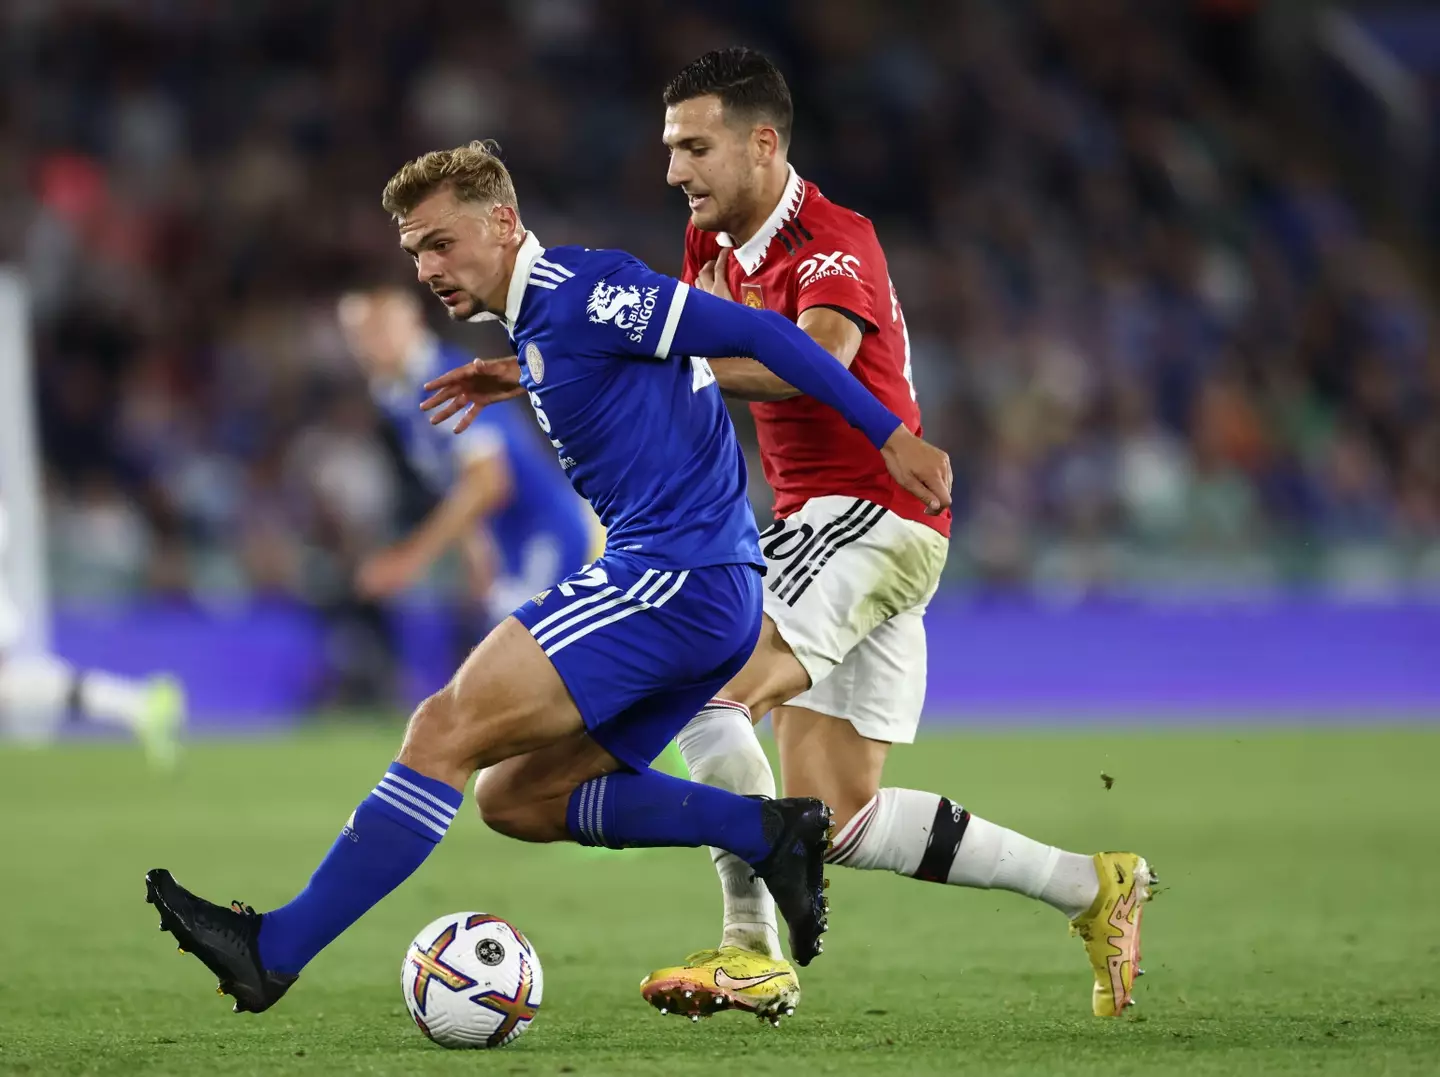 Dalot produced an impressive performance against Leicester (Image: Alamy)